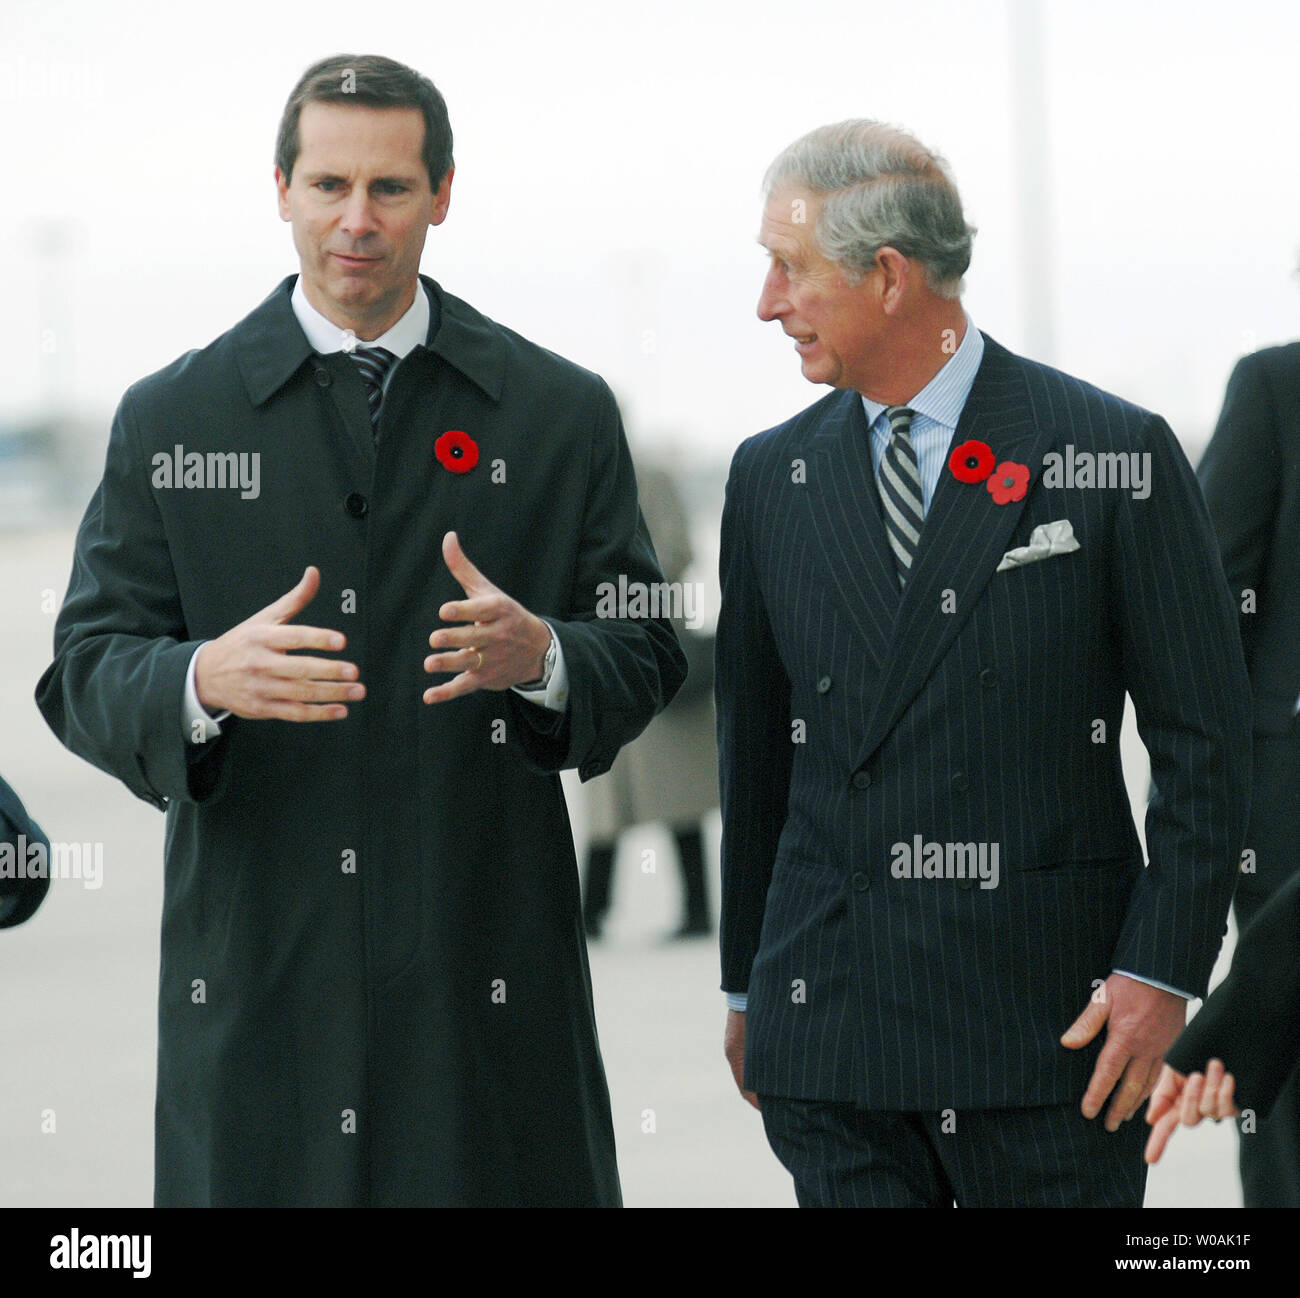 Britain's Prince Charles (R) and Ontario premier Dalton McGuinty chat on the tarmac as the Prince and his wife Camilla, Duchess of Cornwall, arrive at Pearson International Airport in Toronto, Canada on November 4, 2009.  The royal couple are on an 11-day tour of Canada.  UPI /Christine Chew Stock Photo